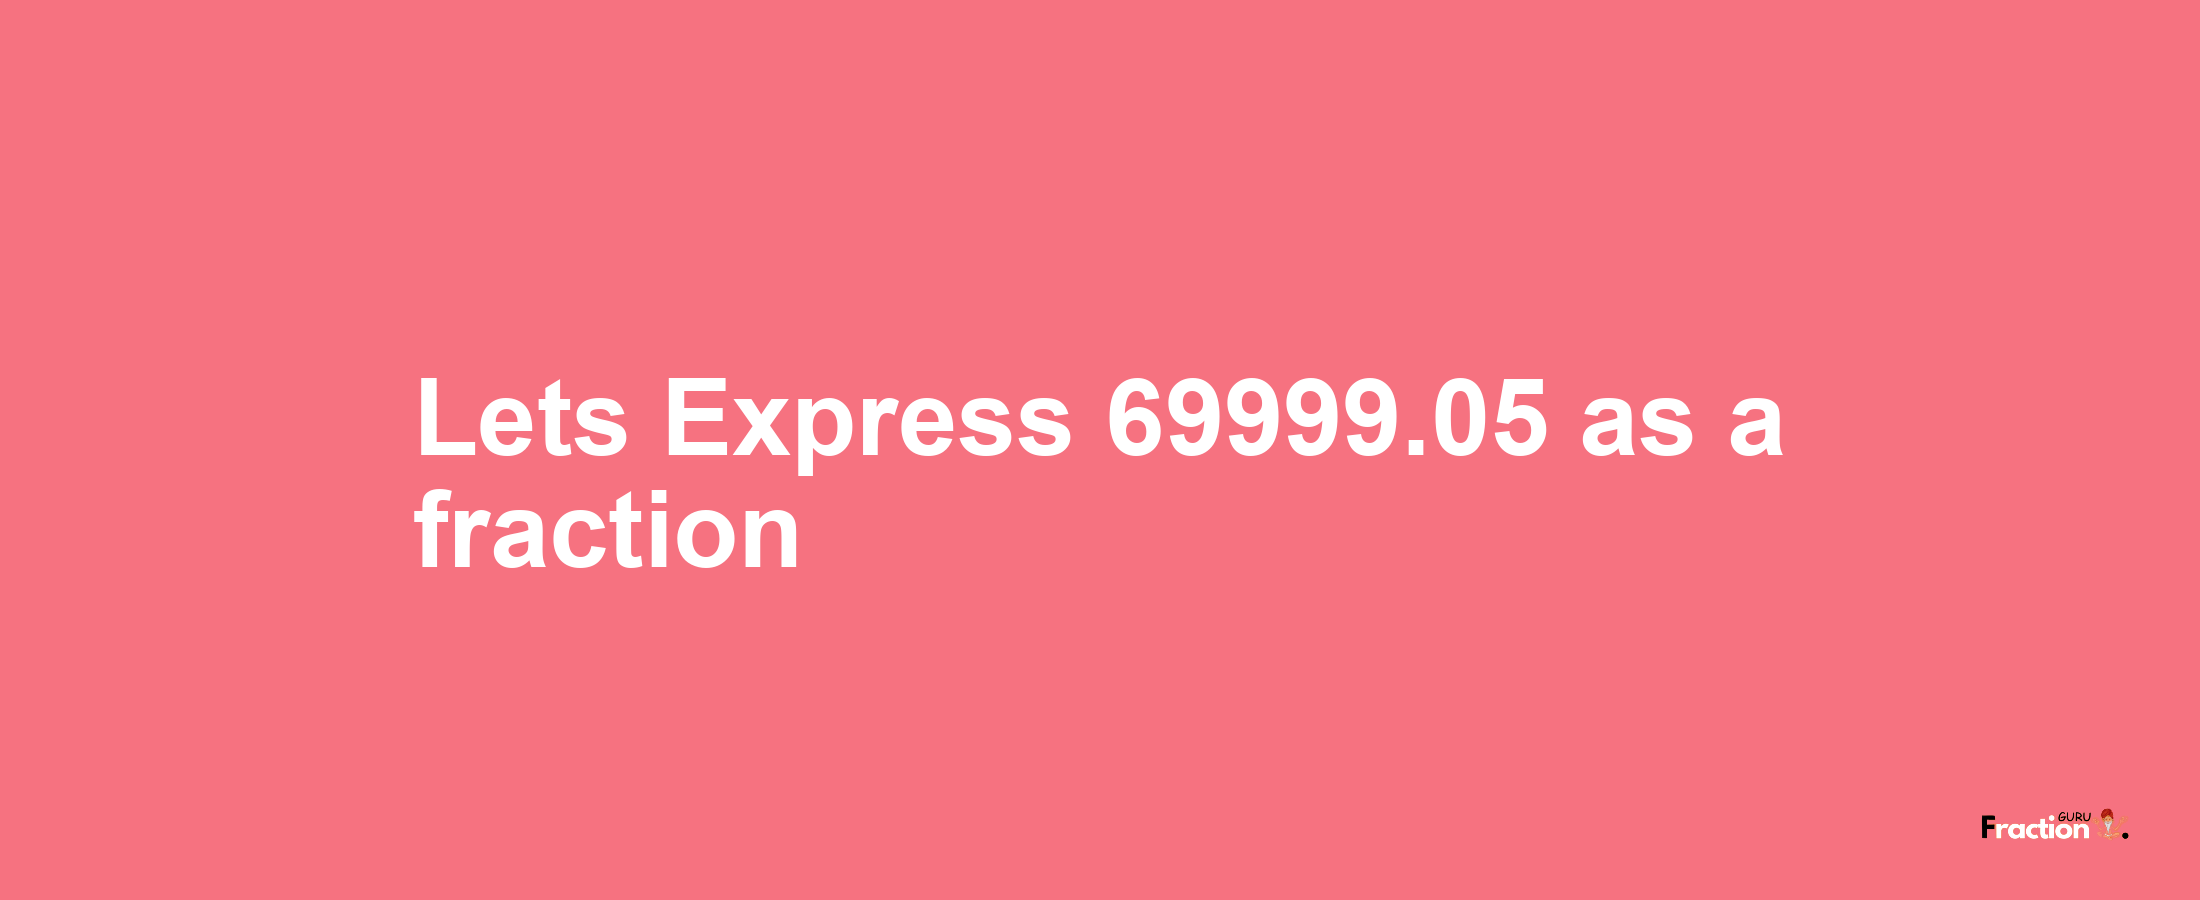 Lets Express 69999.05 as afraction